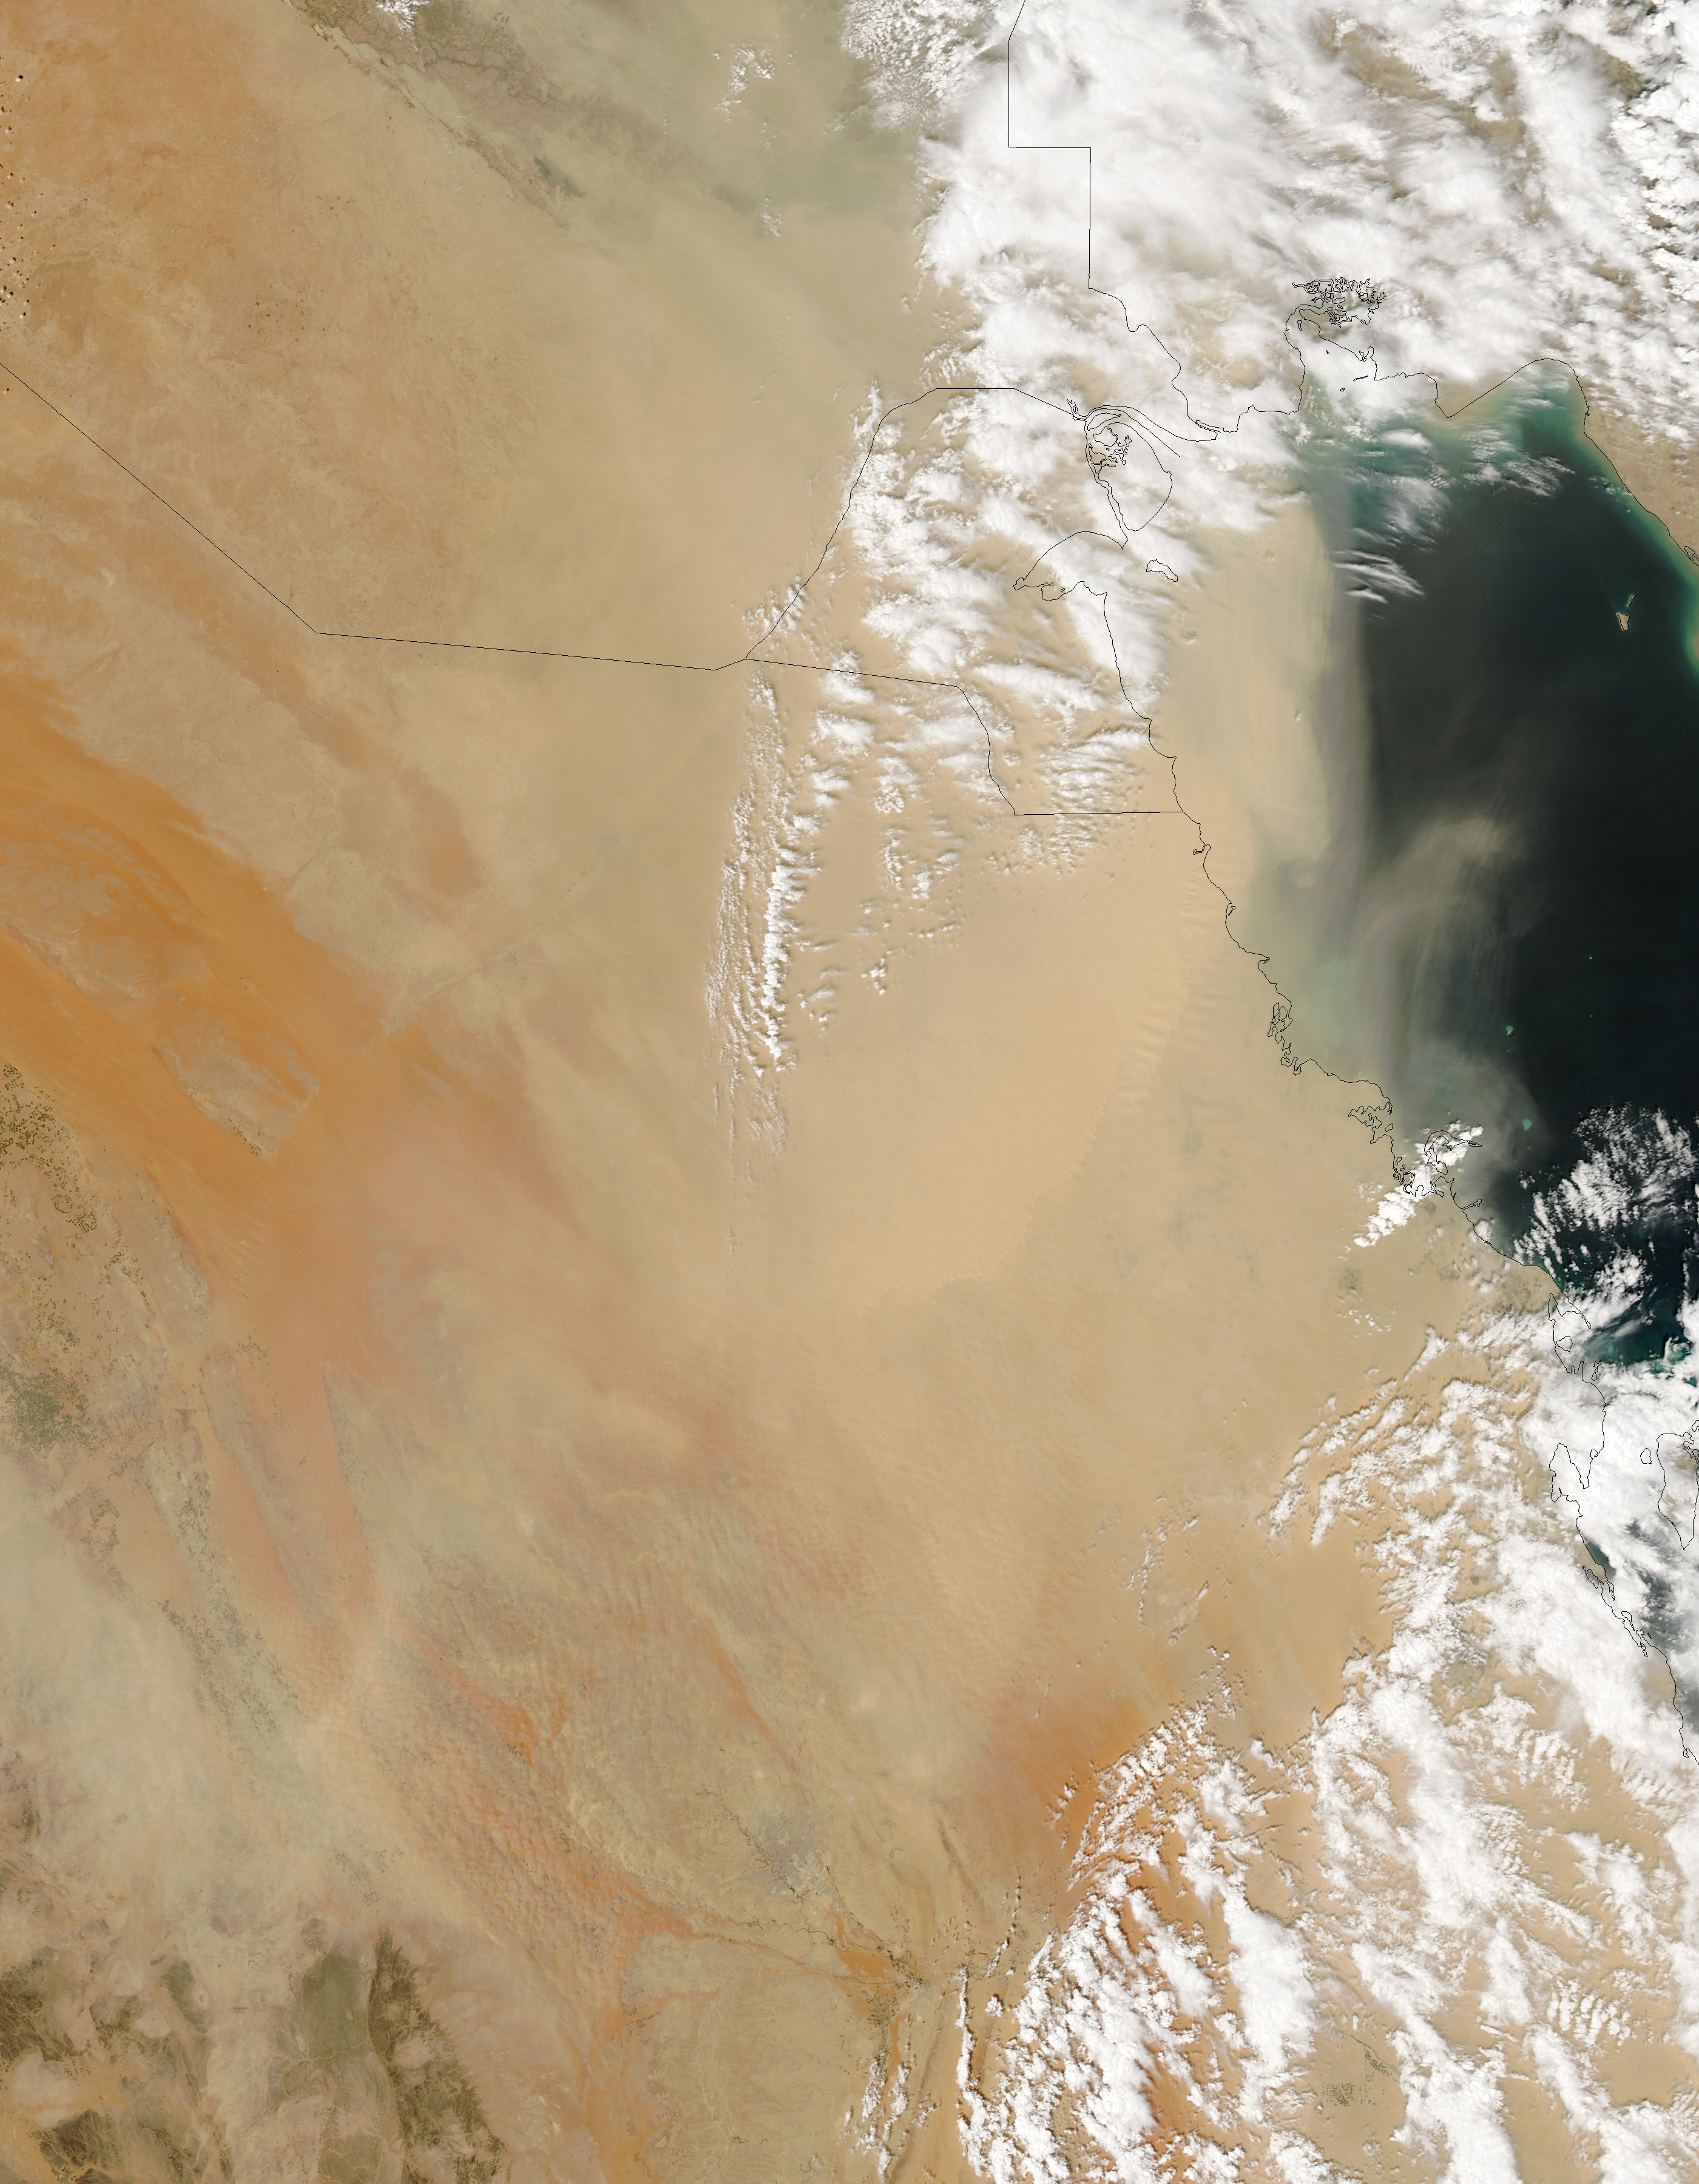 Dust Storm on the Arabian Peninsula - related image preview